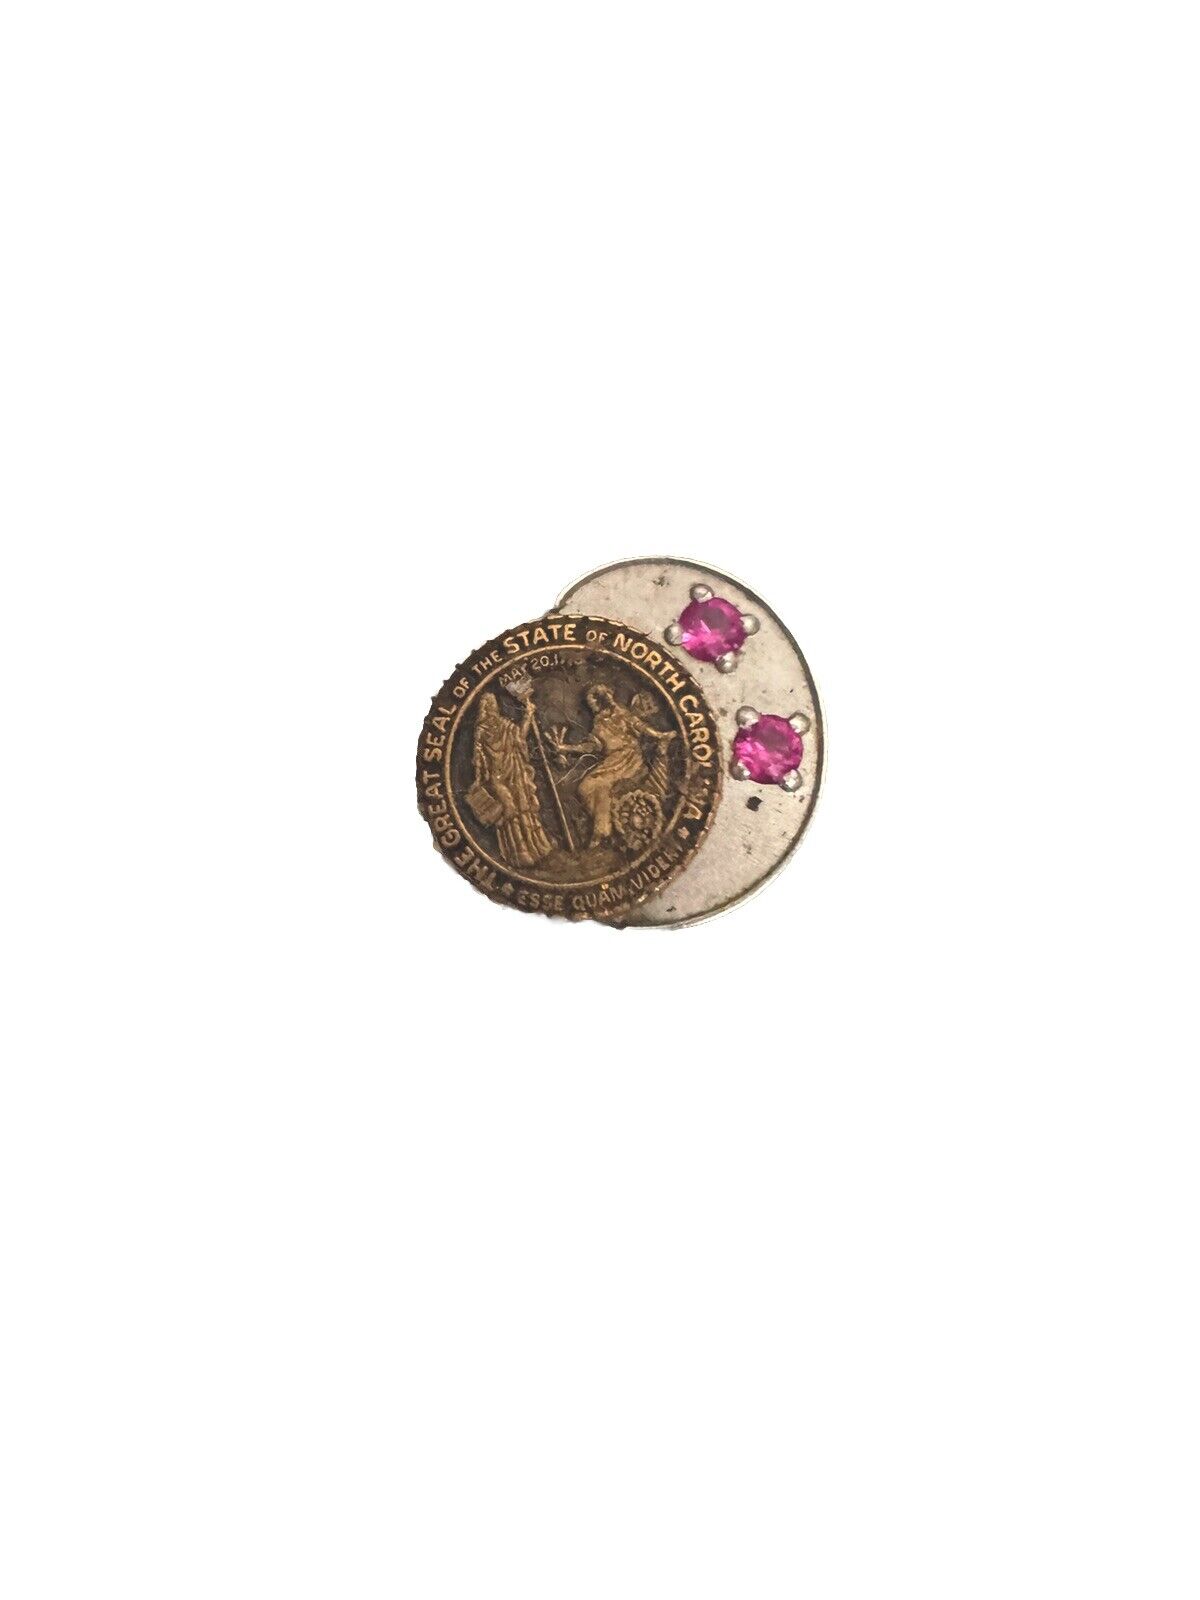 10k The Great Seal of the State of North Carolina PINK GEMSTONES LAPEL Pin